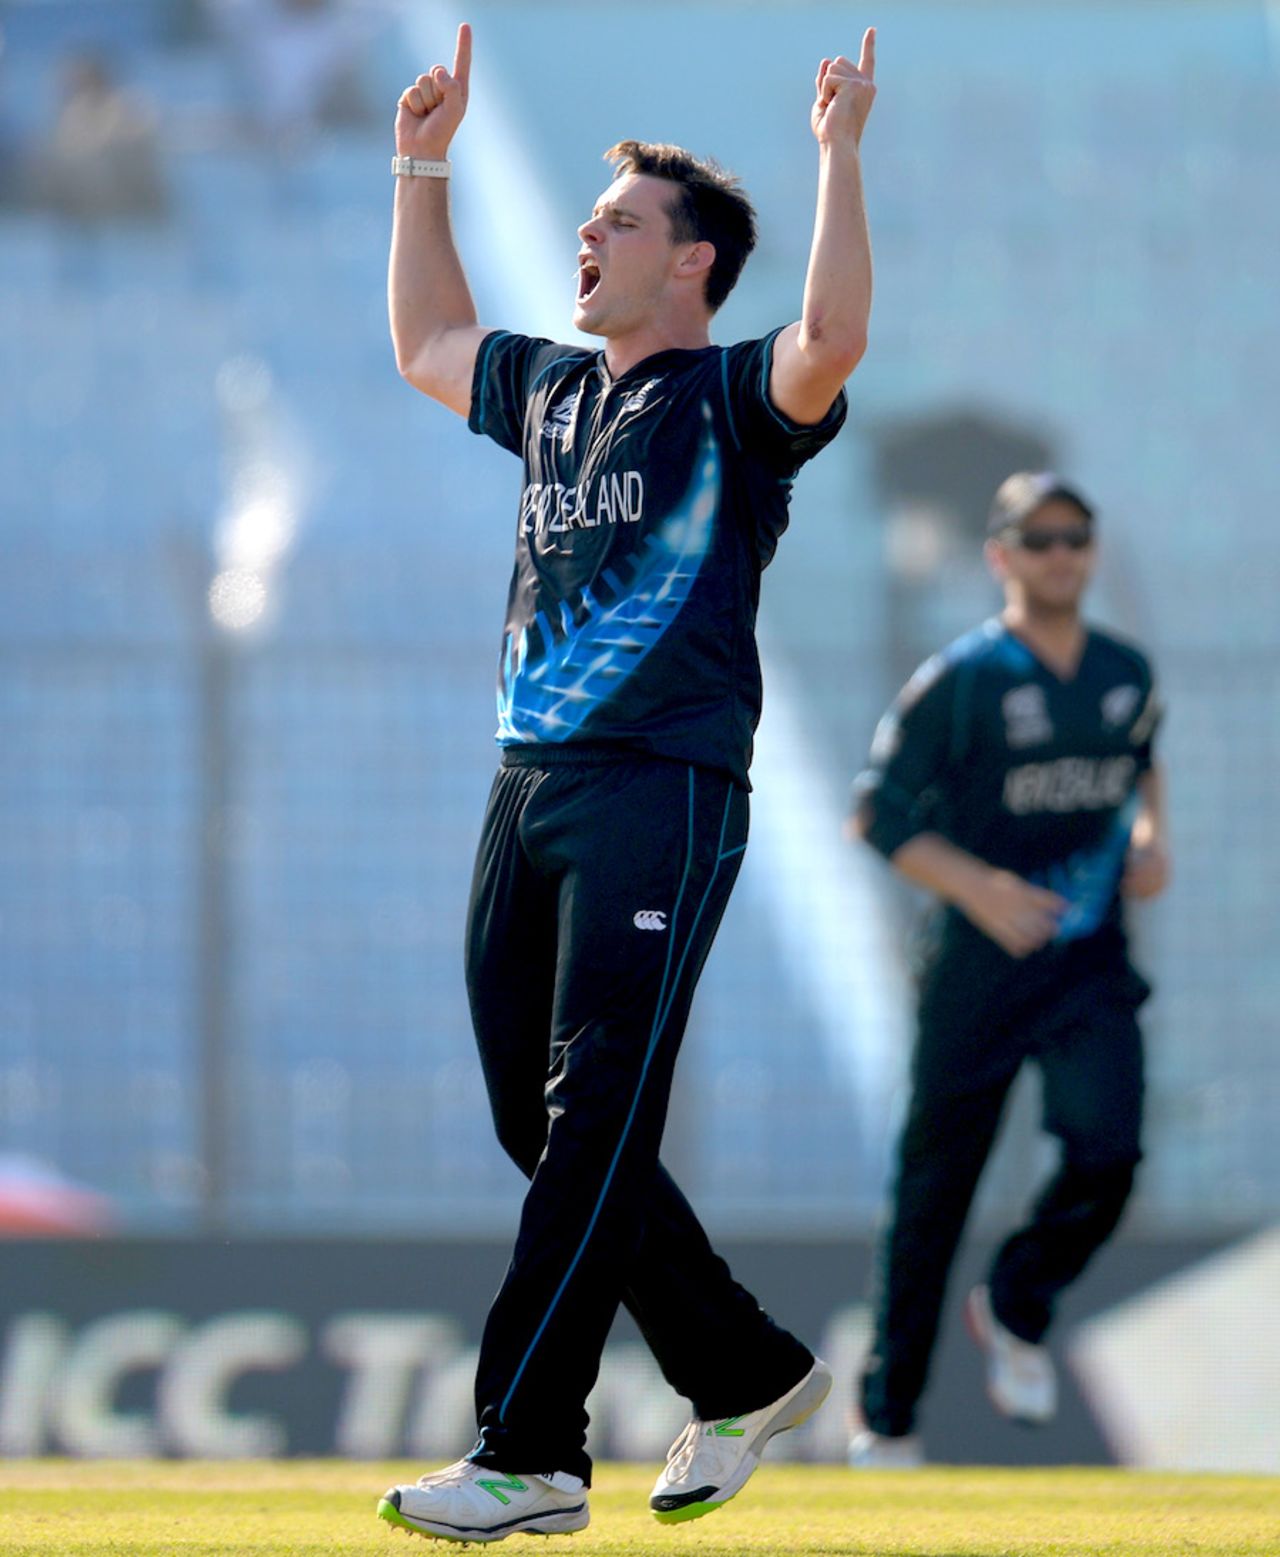 Mitchell McClenaghan struck in his first over, Netherlands v New Zealand, World T20, Group 1, Chittagong, March 29, 2014